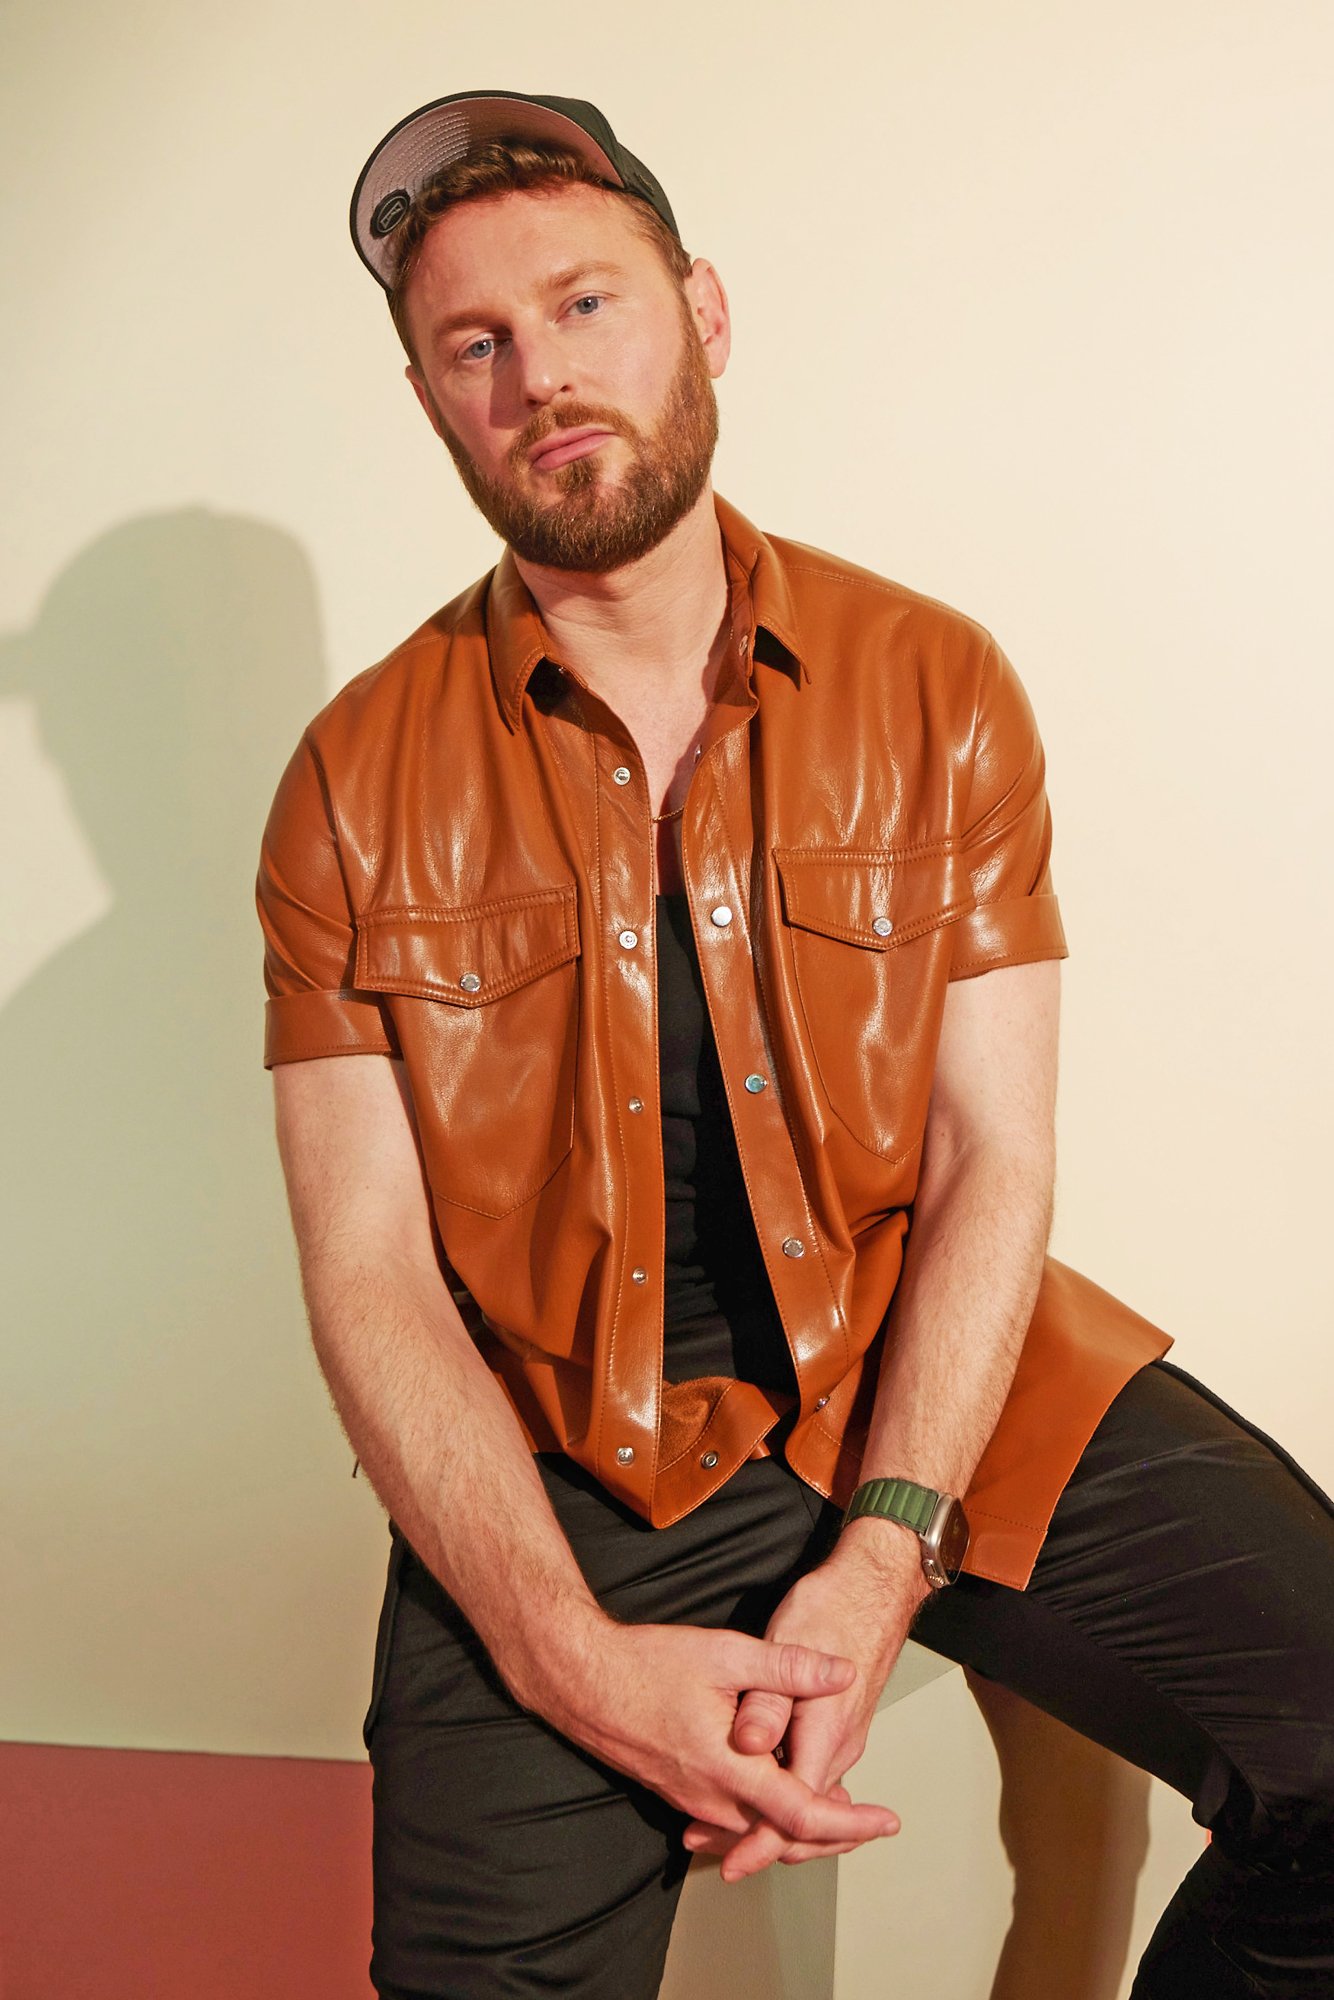 Queer Eye’s Bobby Berk Was ‘Asked to Leave’ Show After Issues With the Cast (Source) (Exclusive)